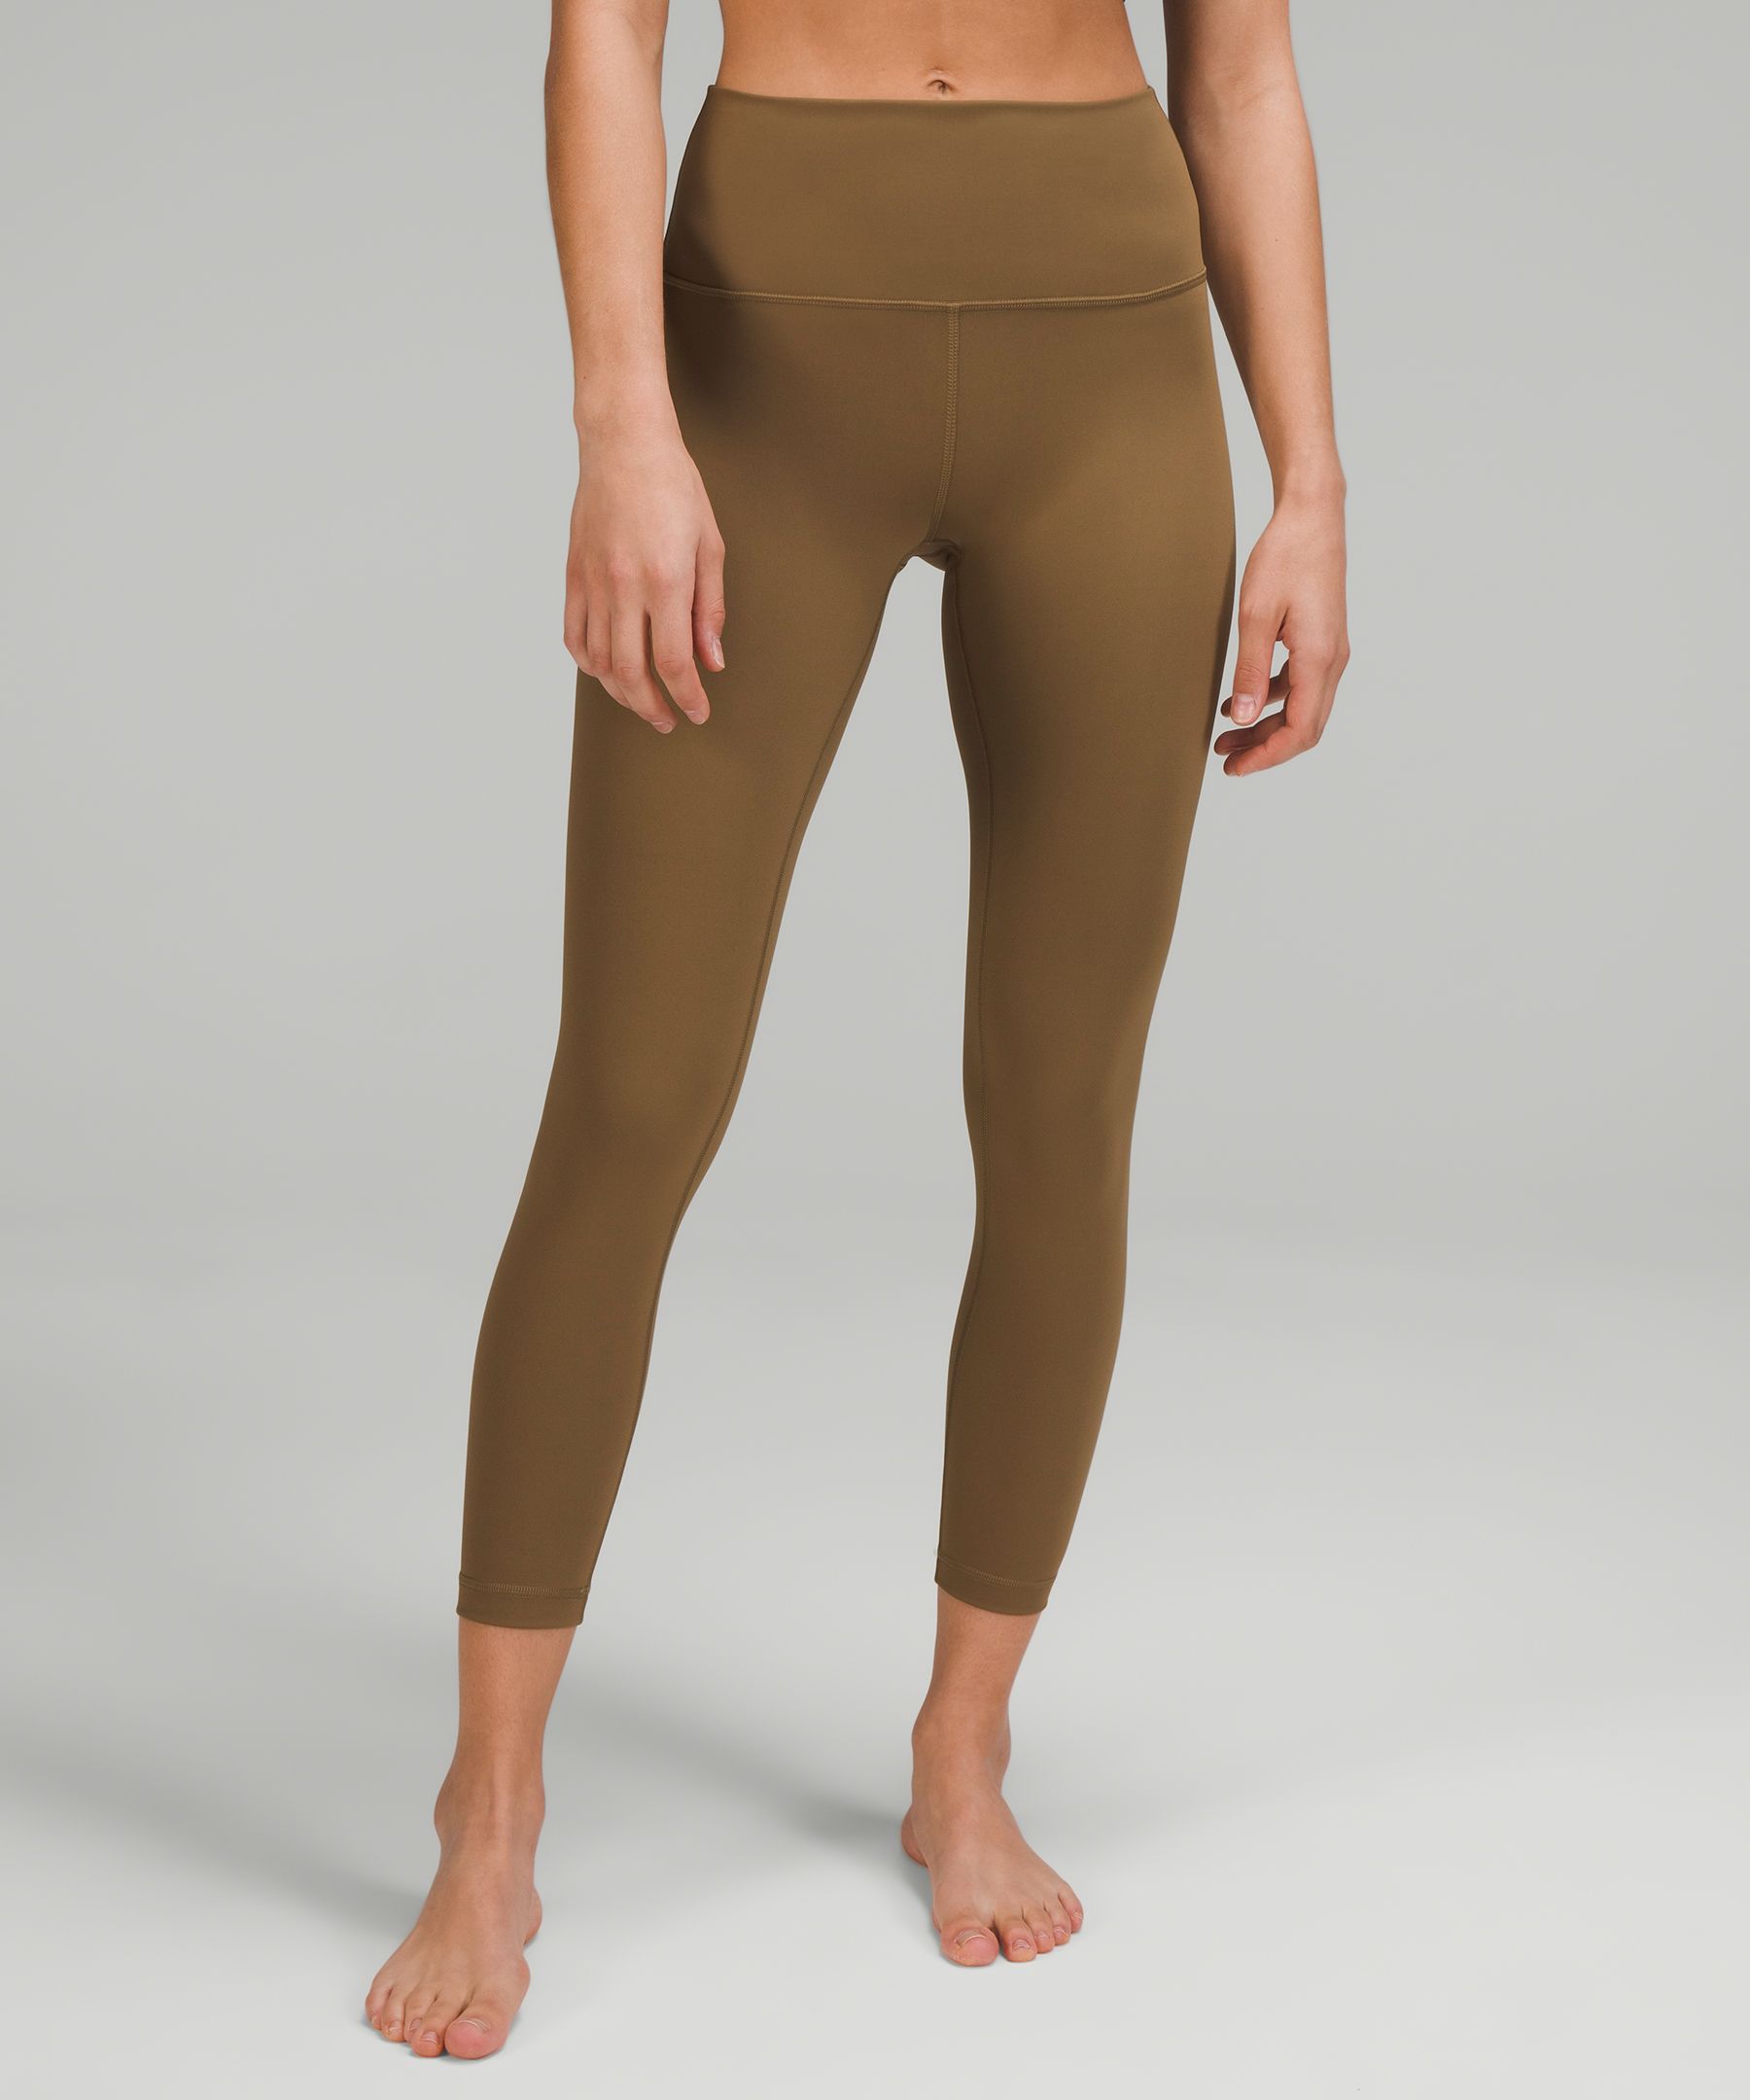 Classic meets perfection with these Speed Tight Wunder Unders